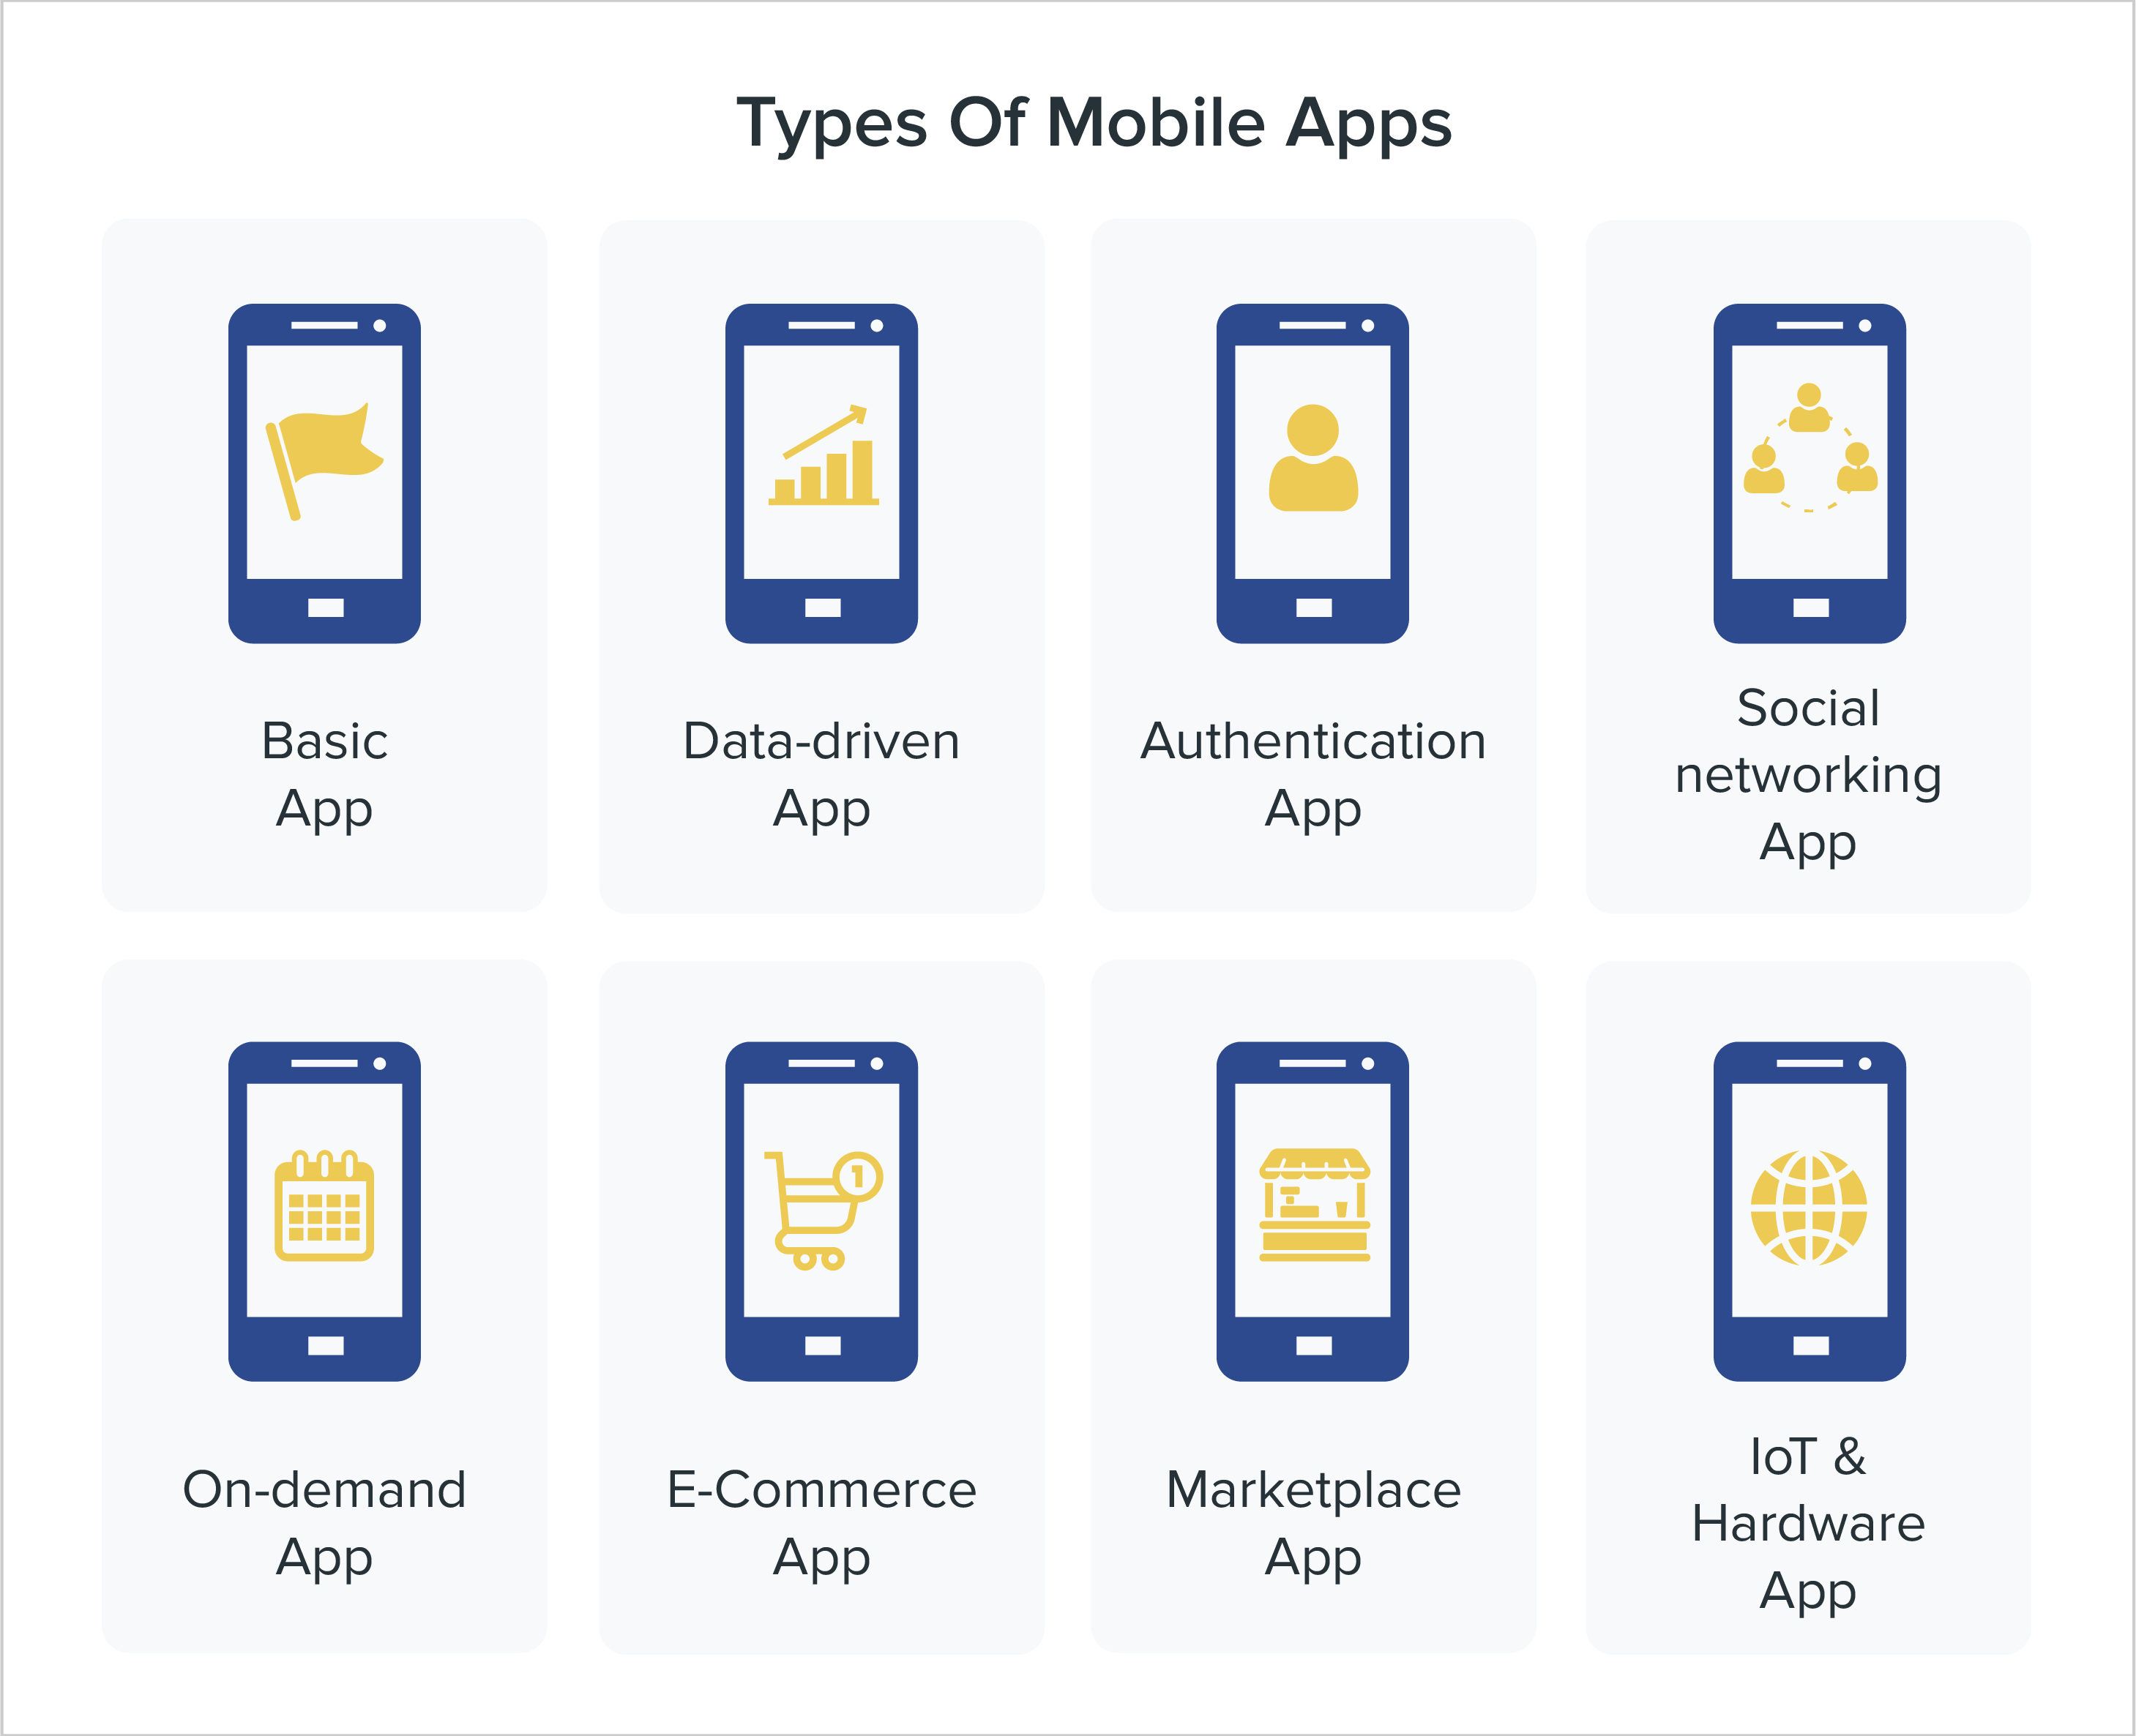 Types of Mobile apps